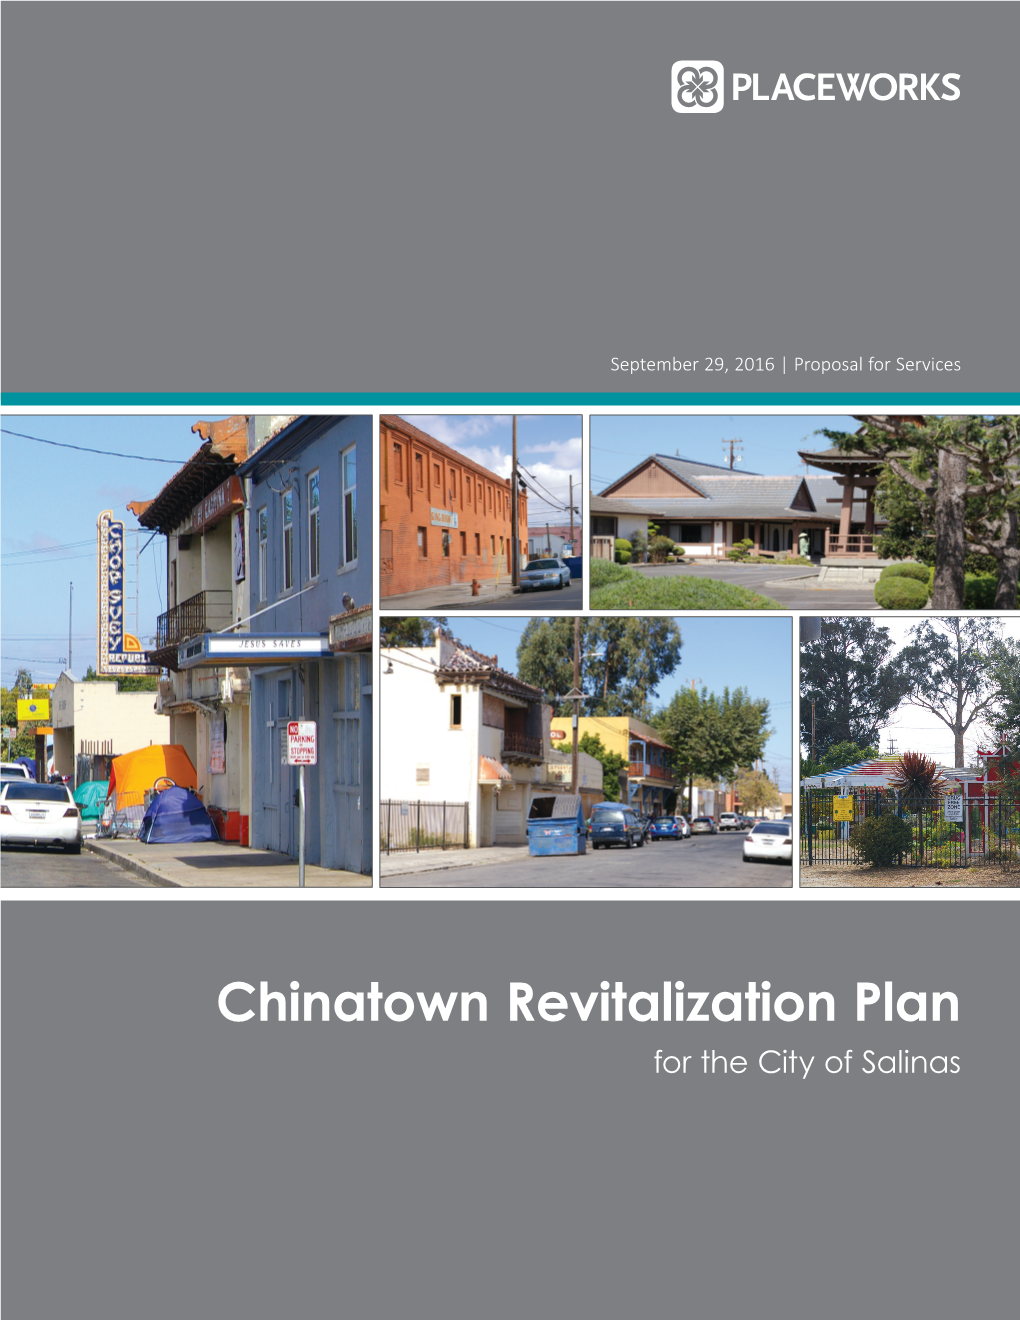 Chinatown Revitalization Plan for the City of Salinas